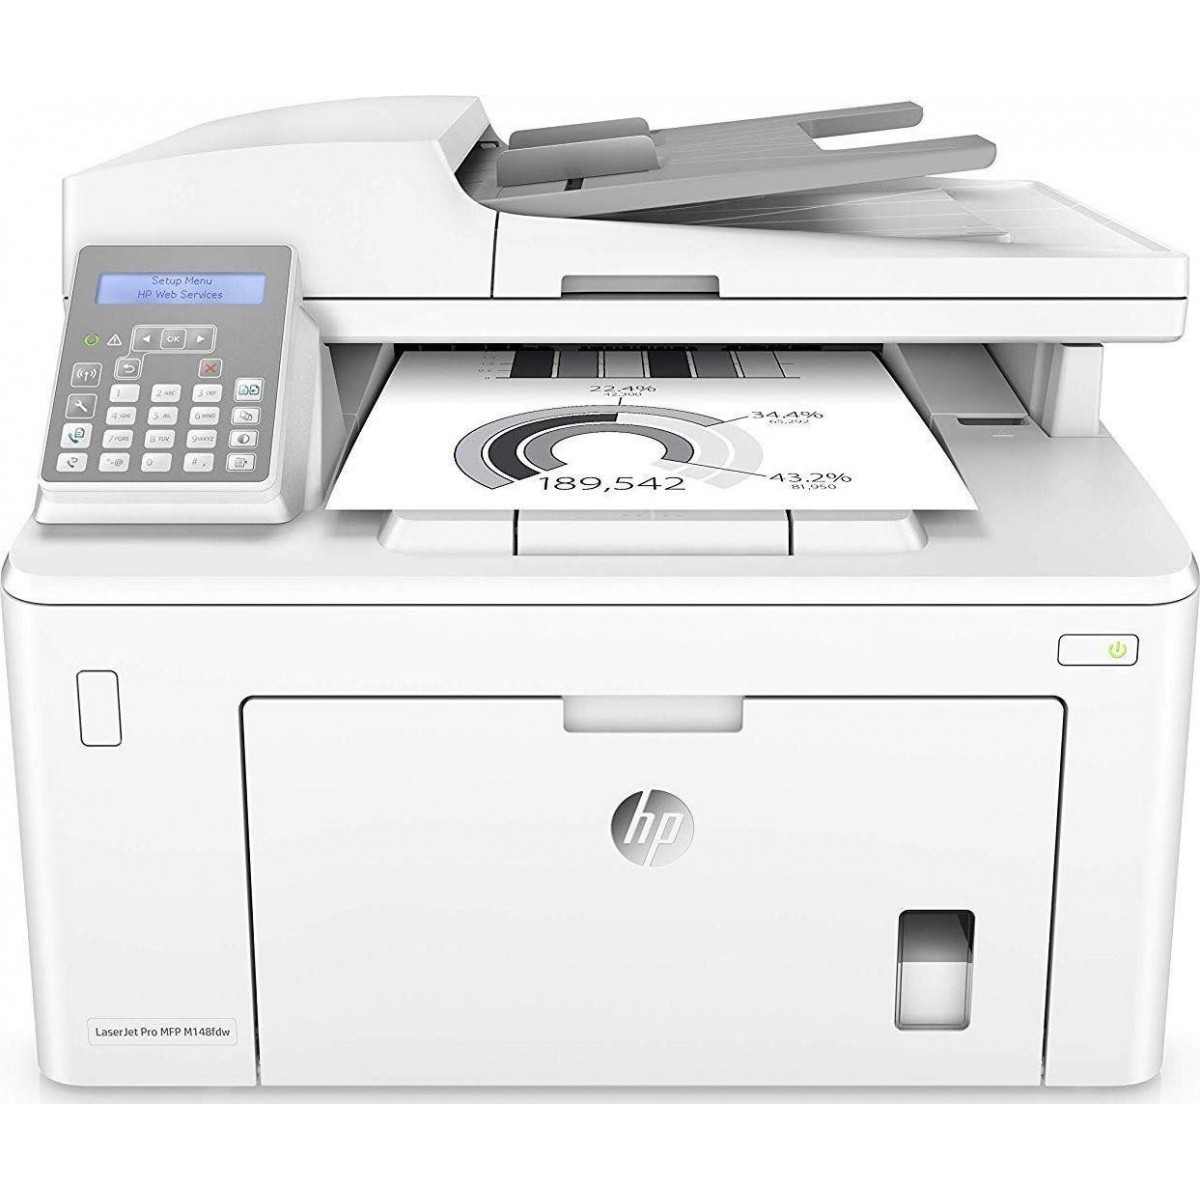 HP LaserJet Pro MFP M148fdw - Black and white - Printer for Home and home office - Print - copy - scan - fax - Laser - Mono prin